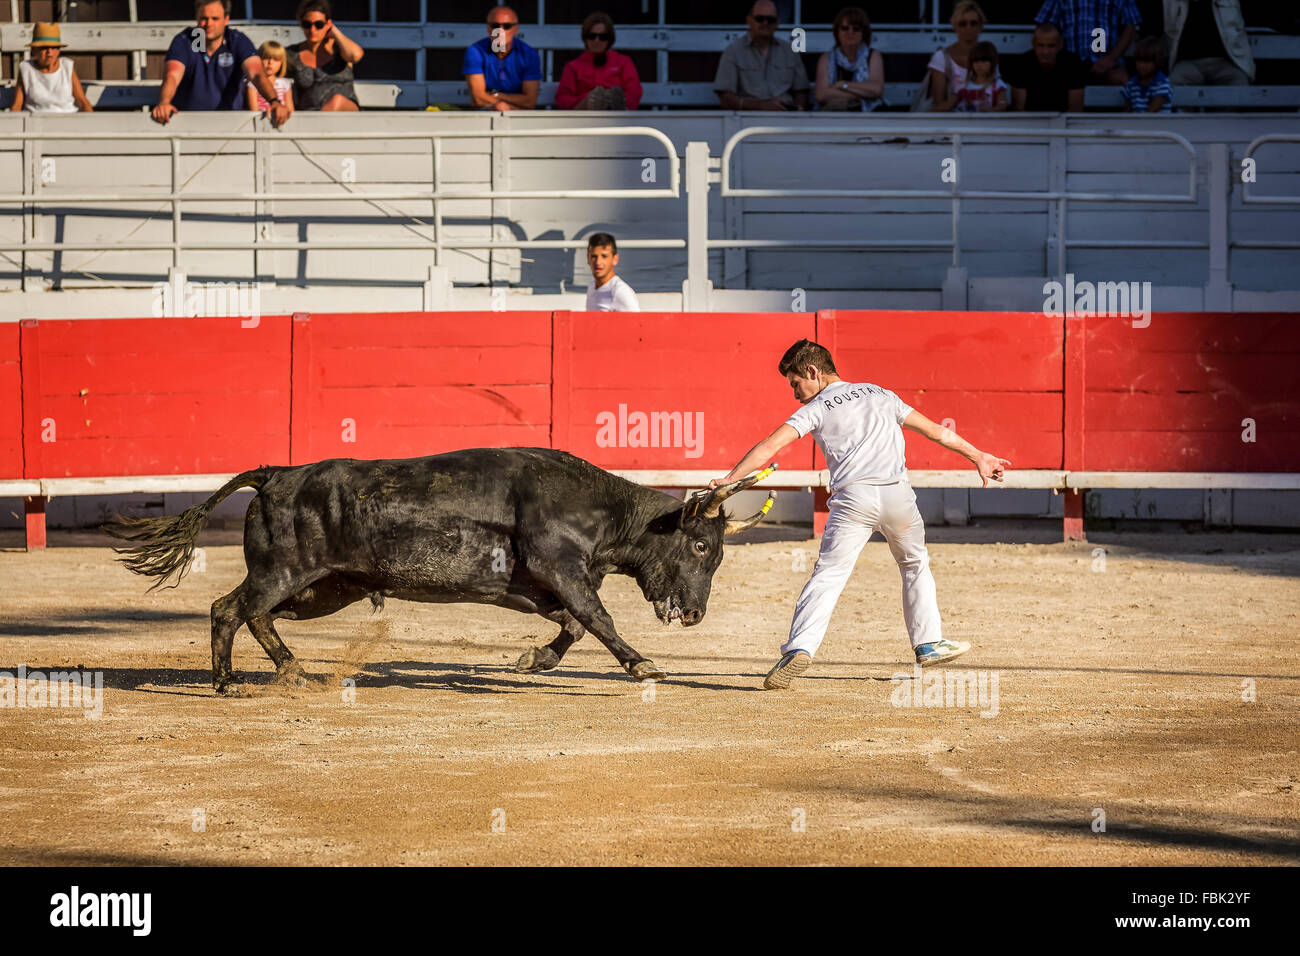 A bullfighter tries to remove the rosette, tassels and strings from the head of a Camargue bull, Arles Amphitheater, France Stock Photo